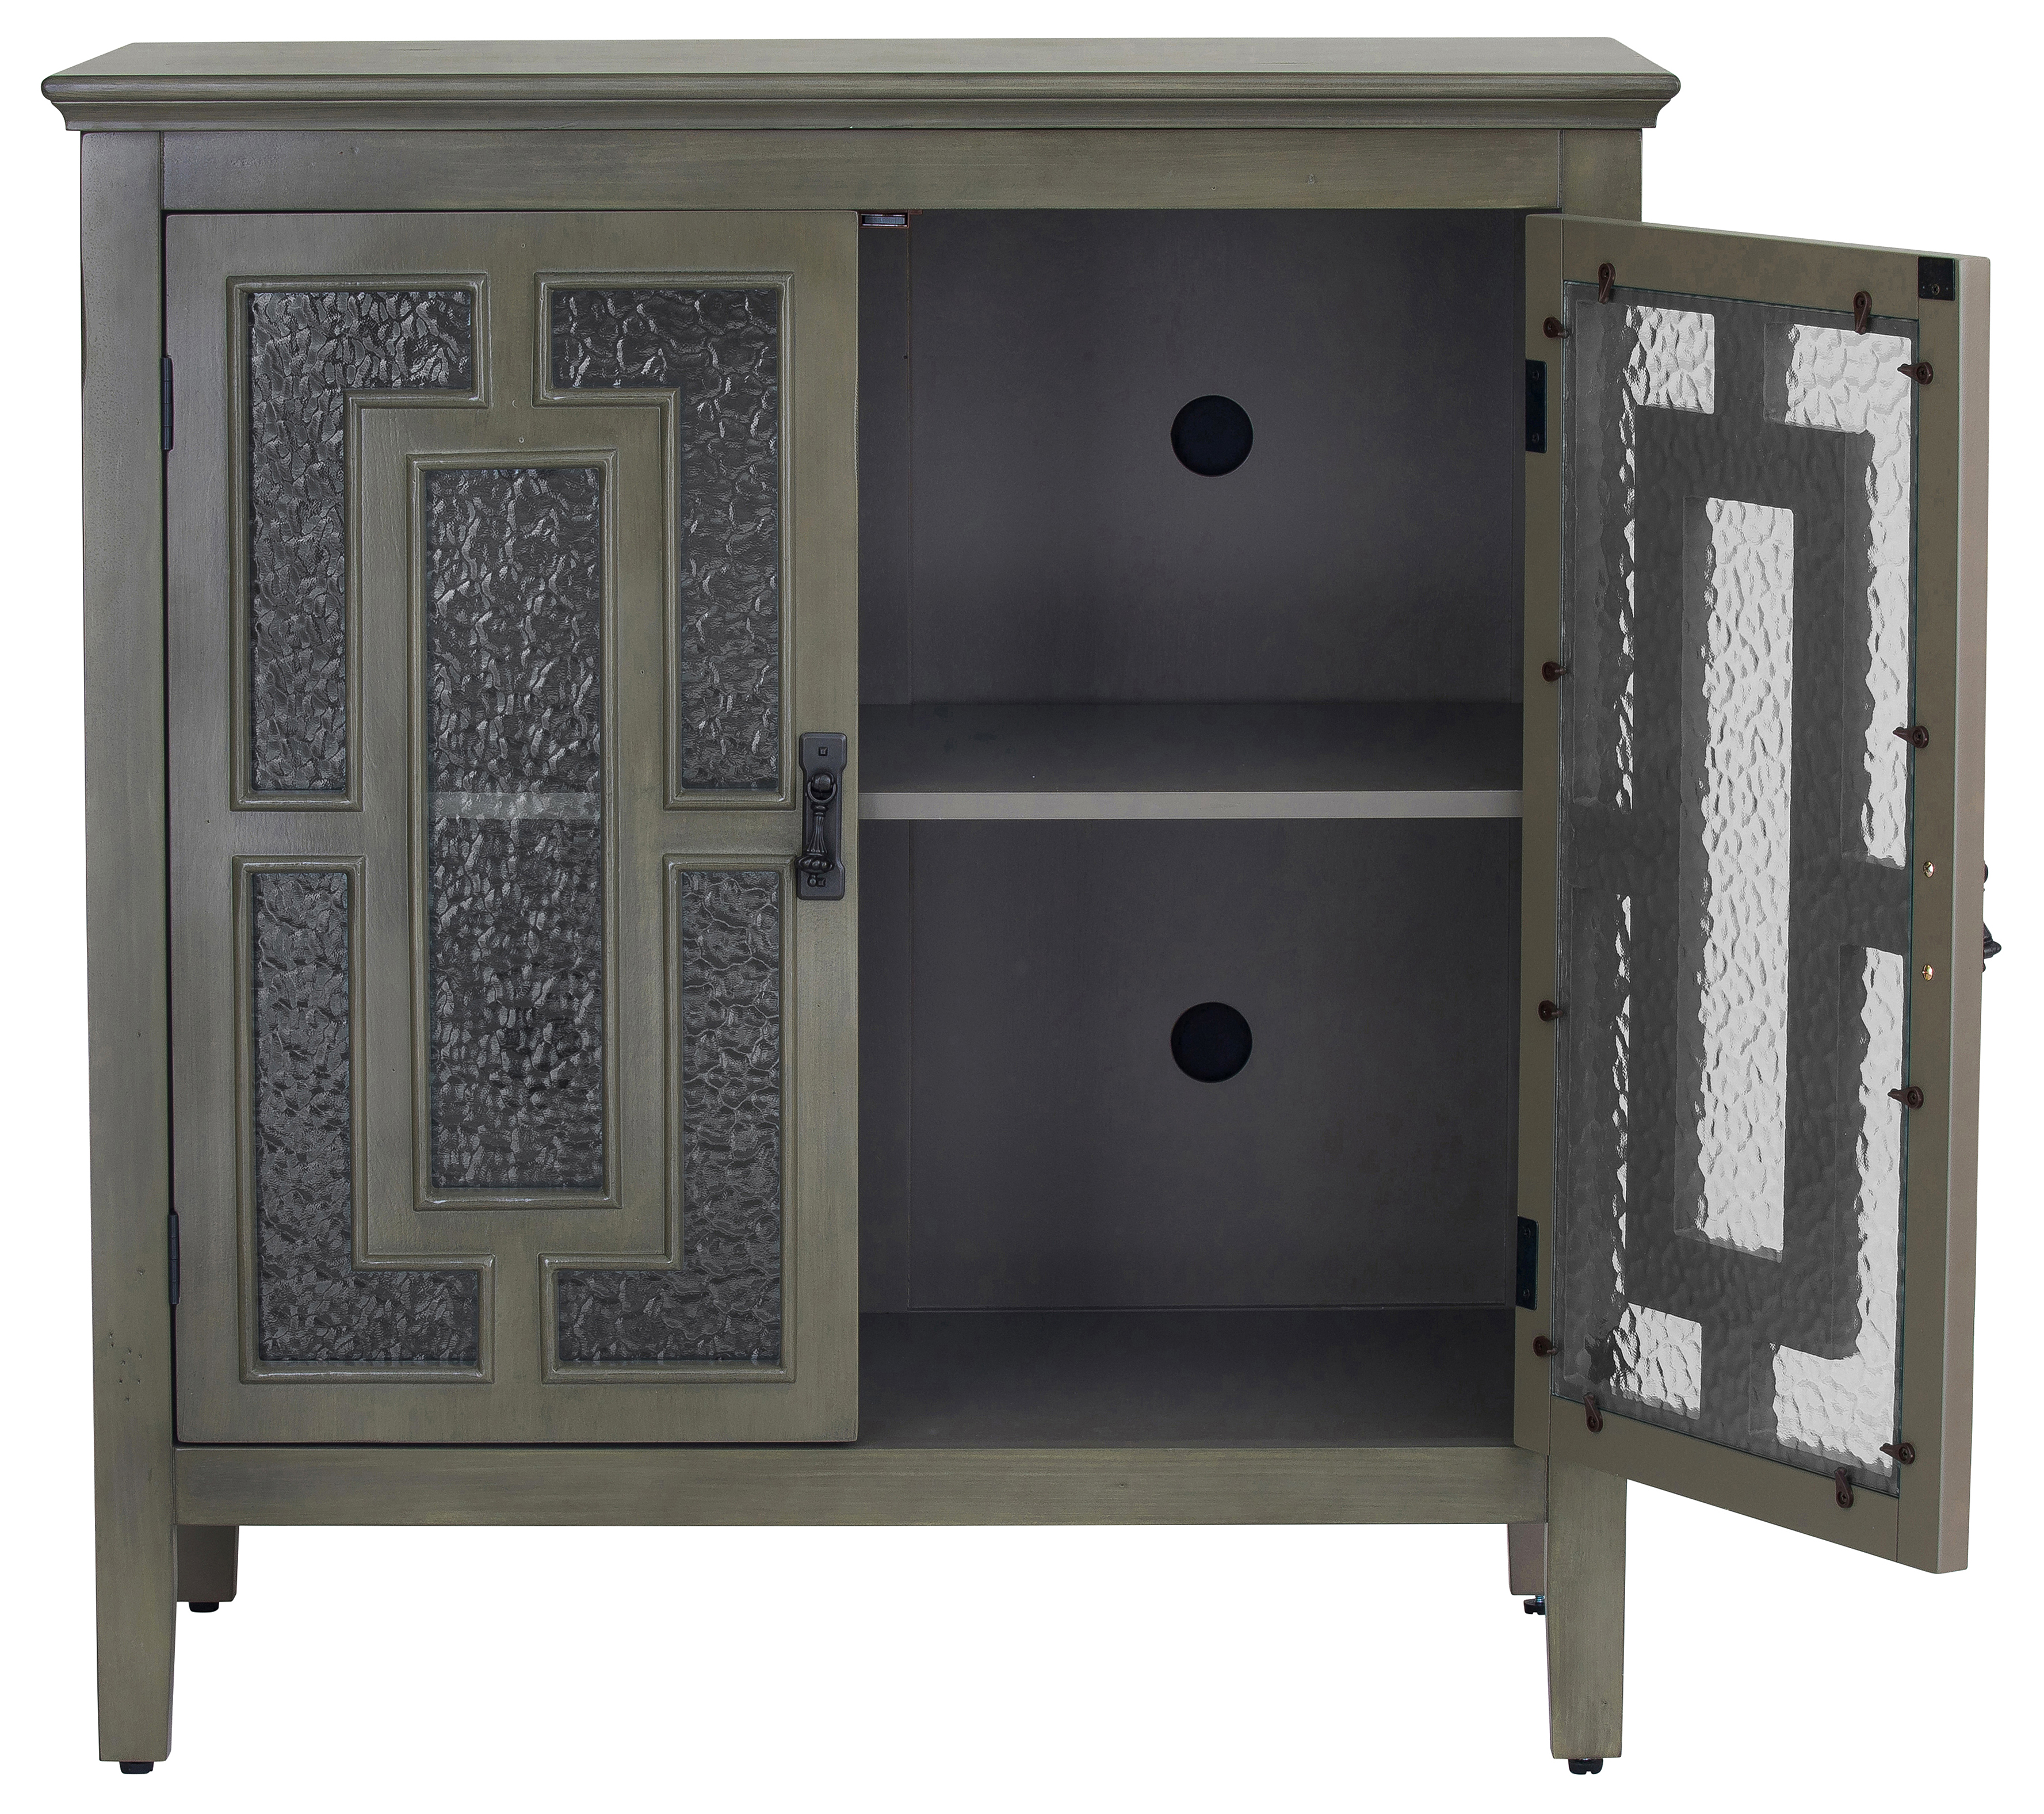 Glenwillow Home 36" Wide High Boy TV Stand/Accent Cabinet ...